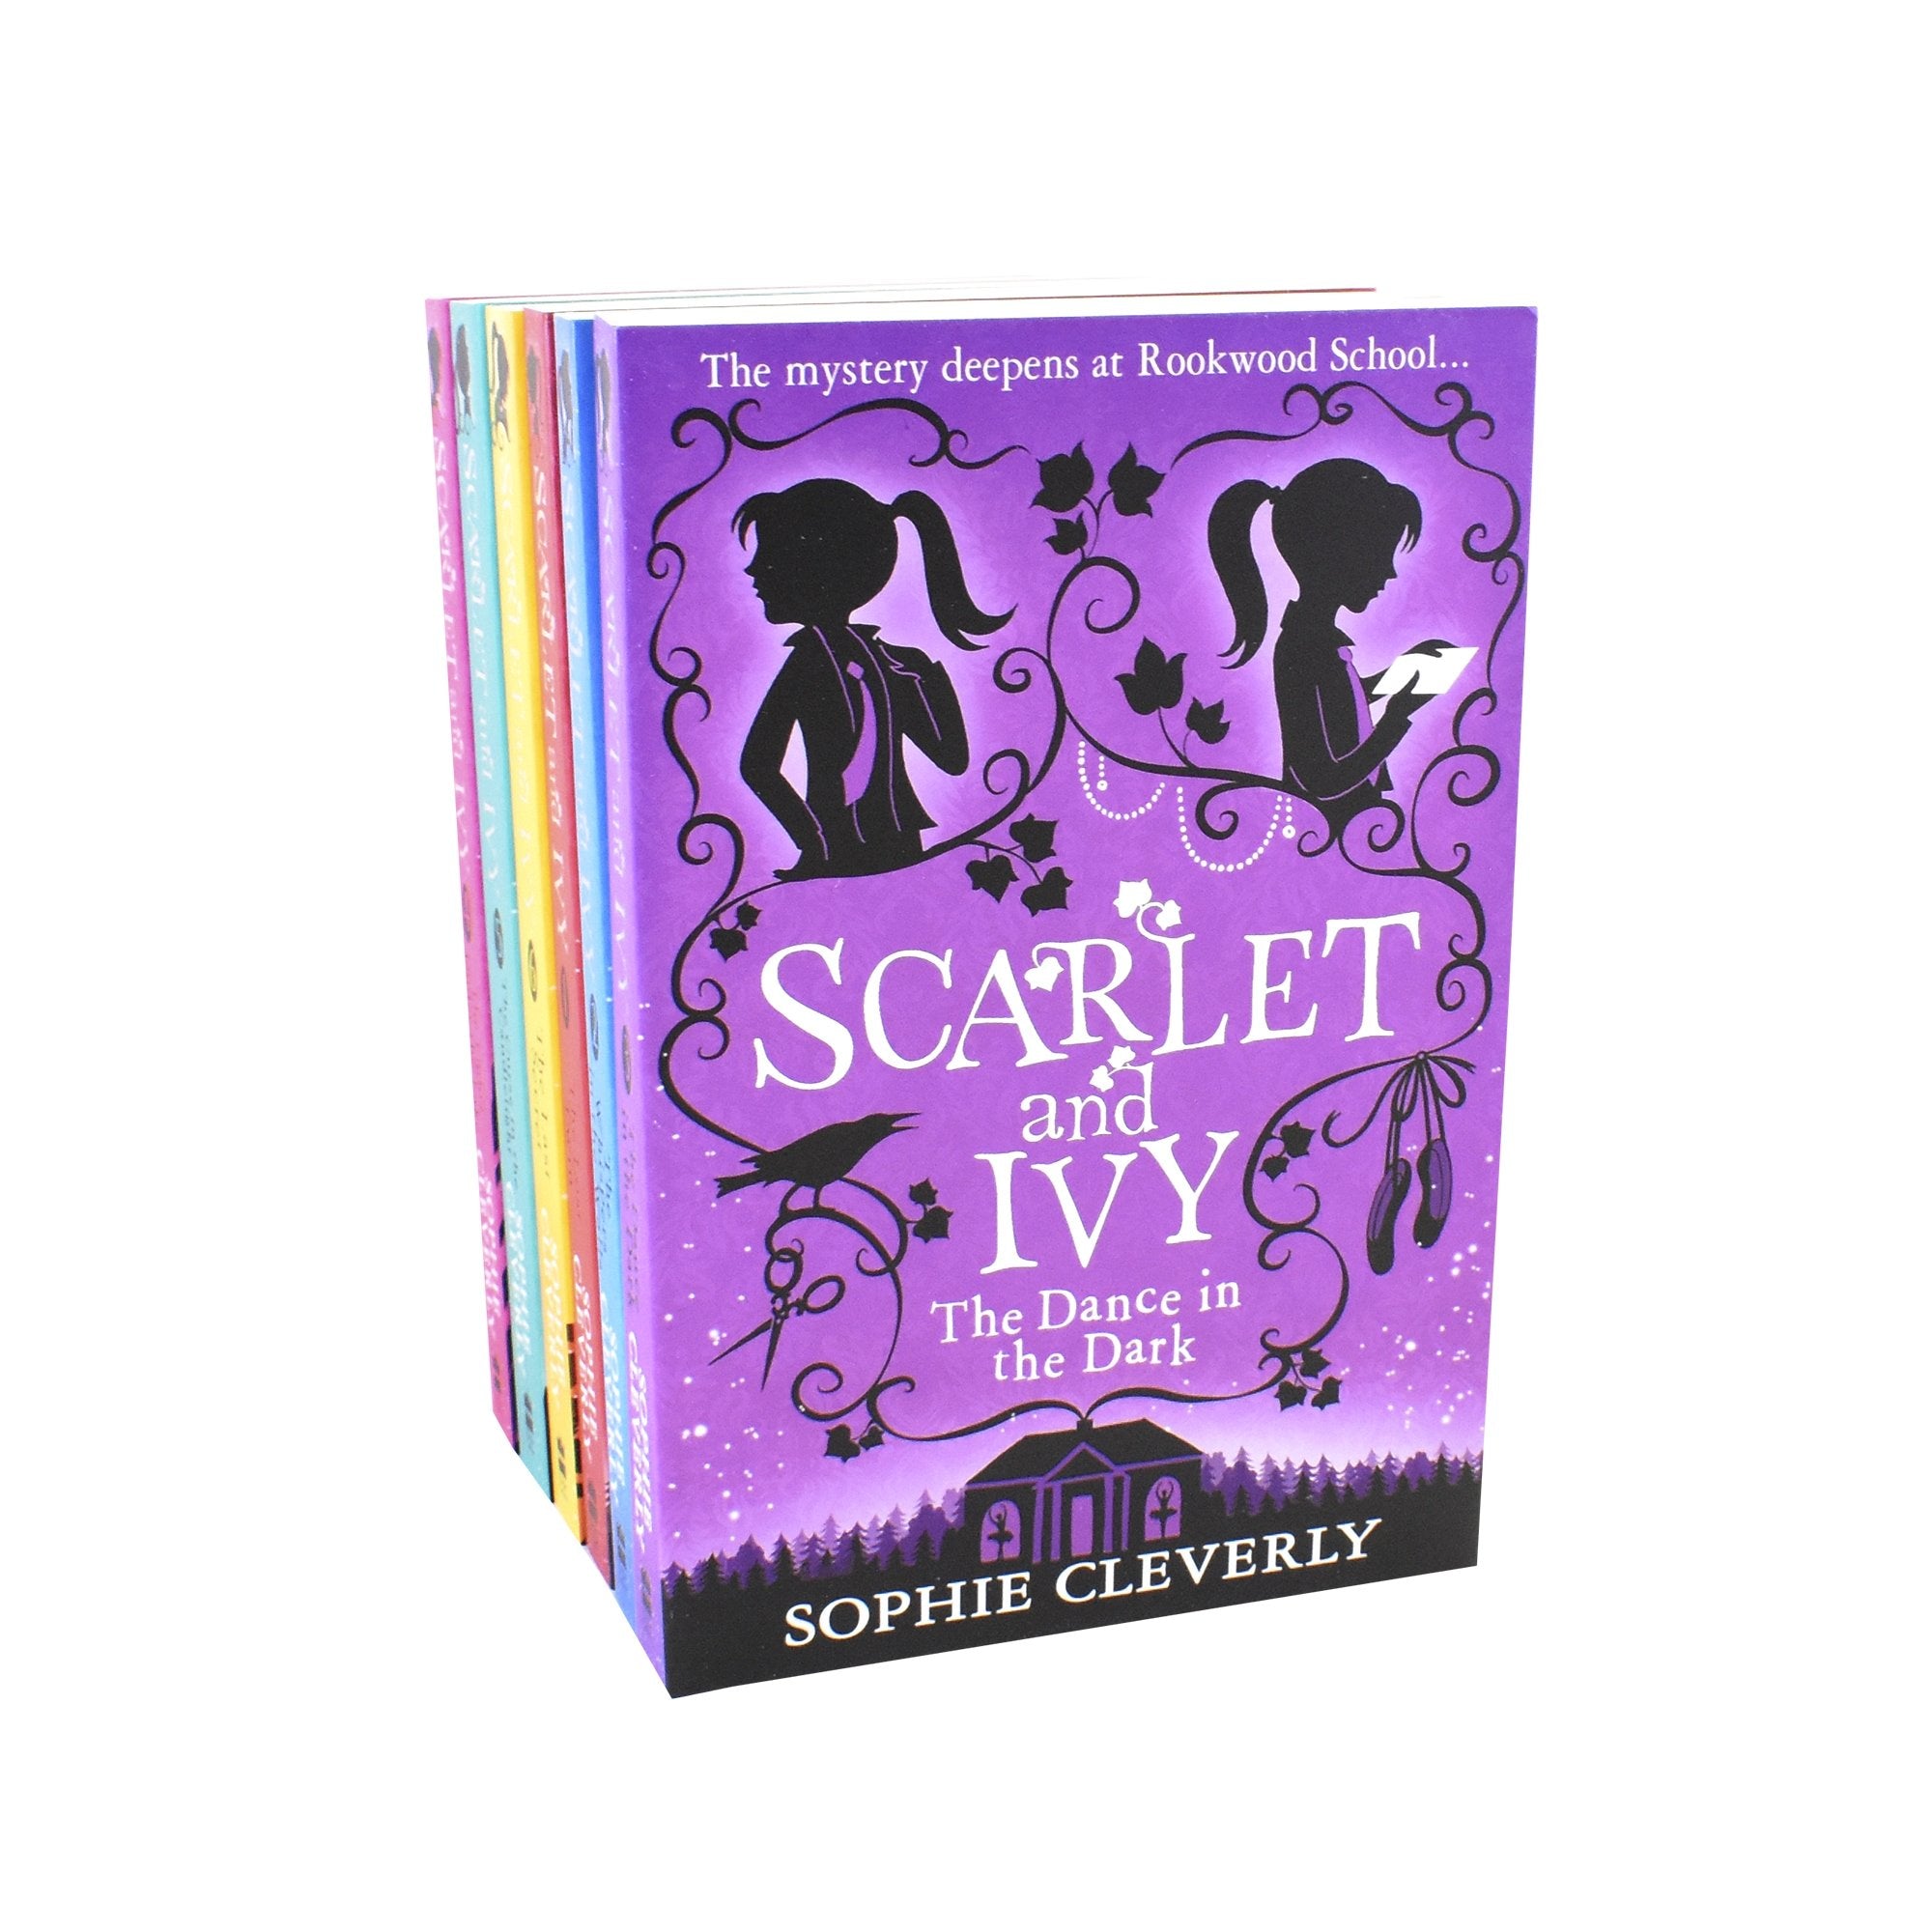 Scarlet & Ivy 6 Books Young Adult Collection Paperback Set By Sophie Cleverly - St Stephens Books